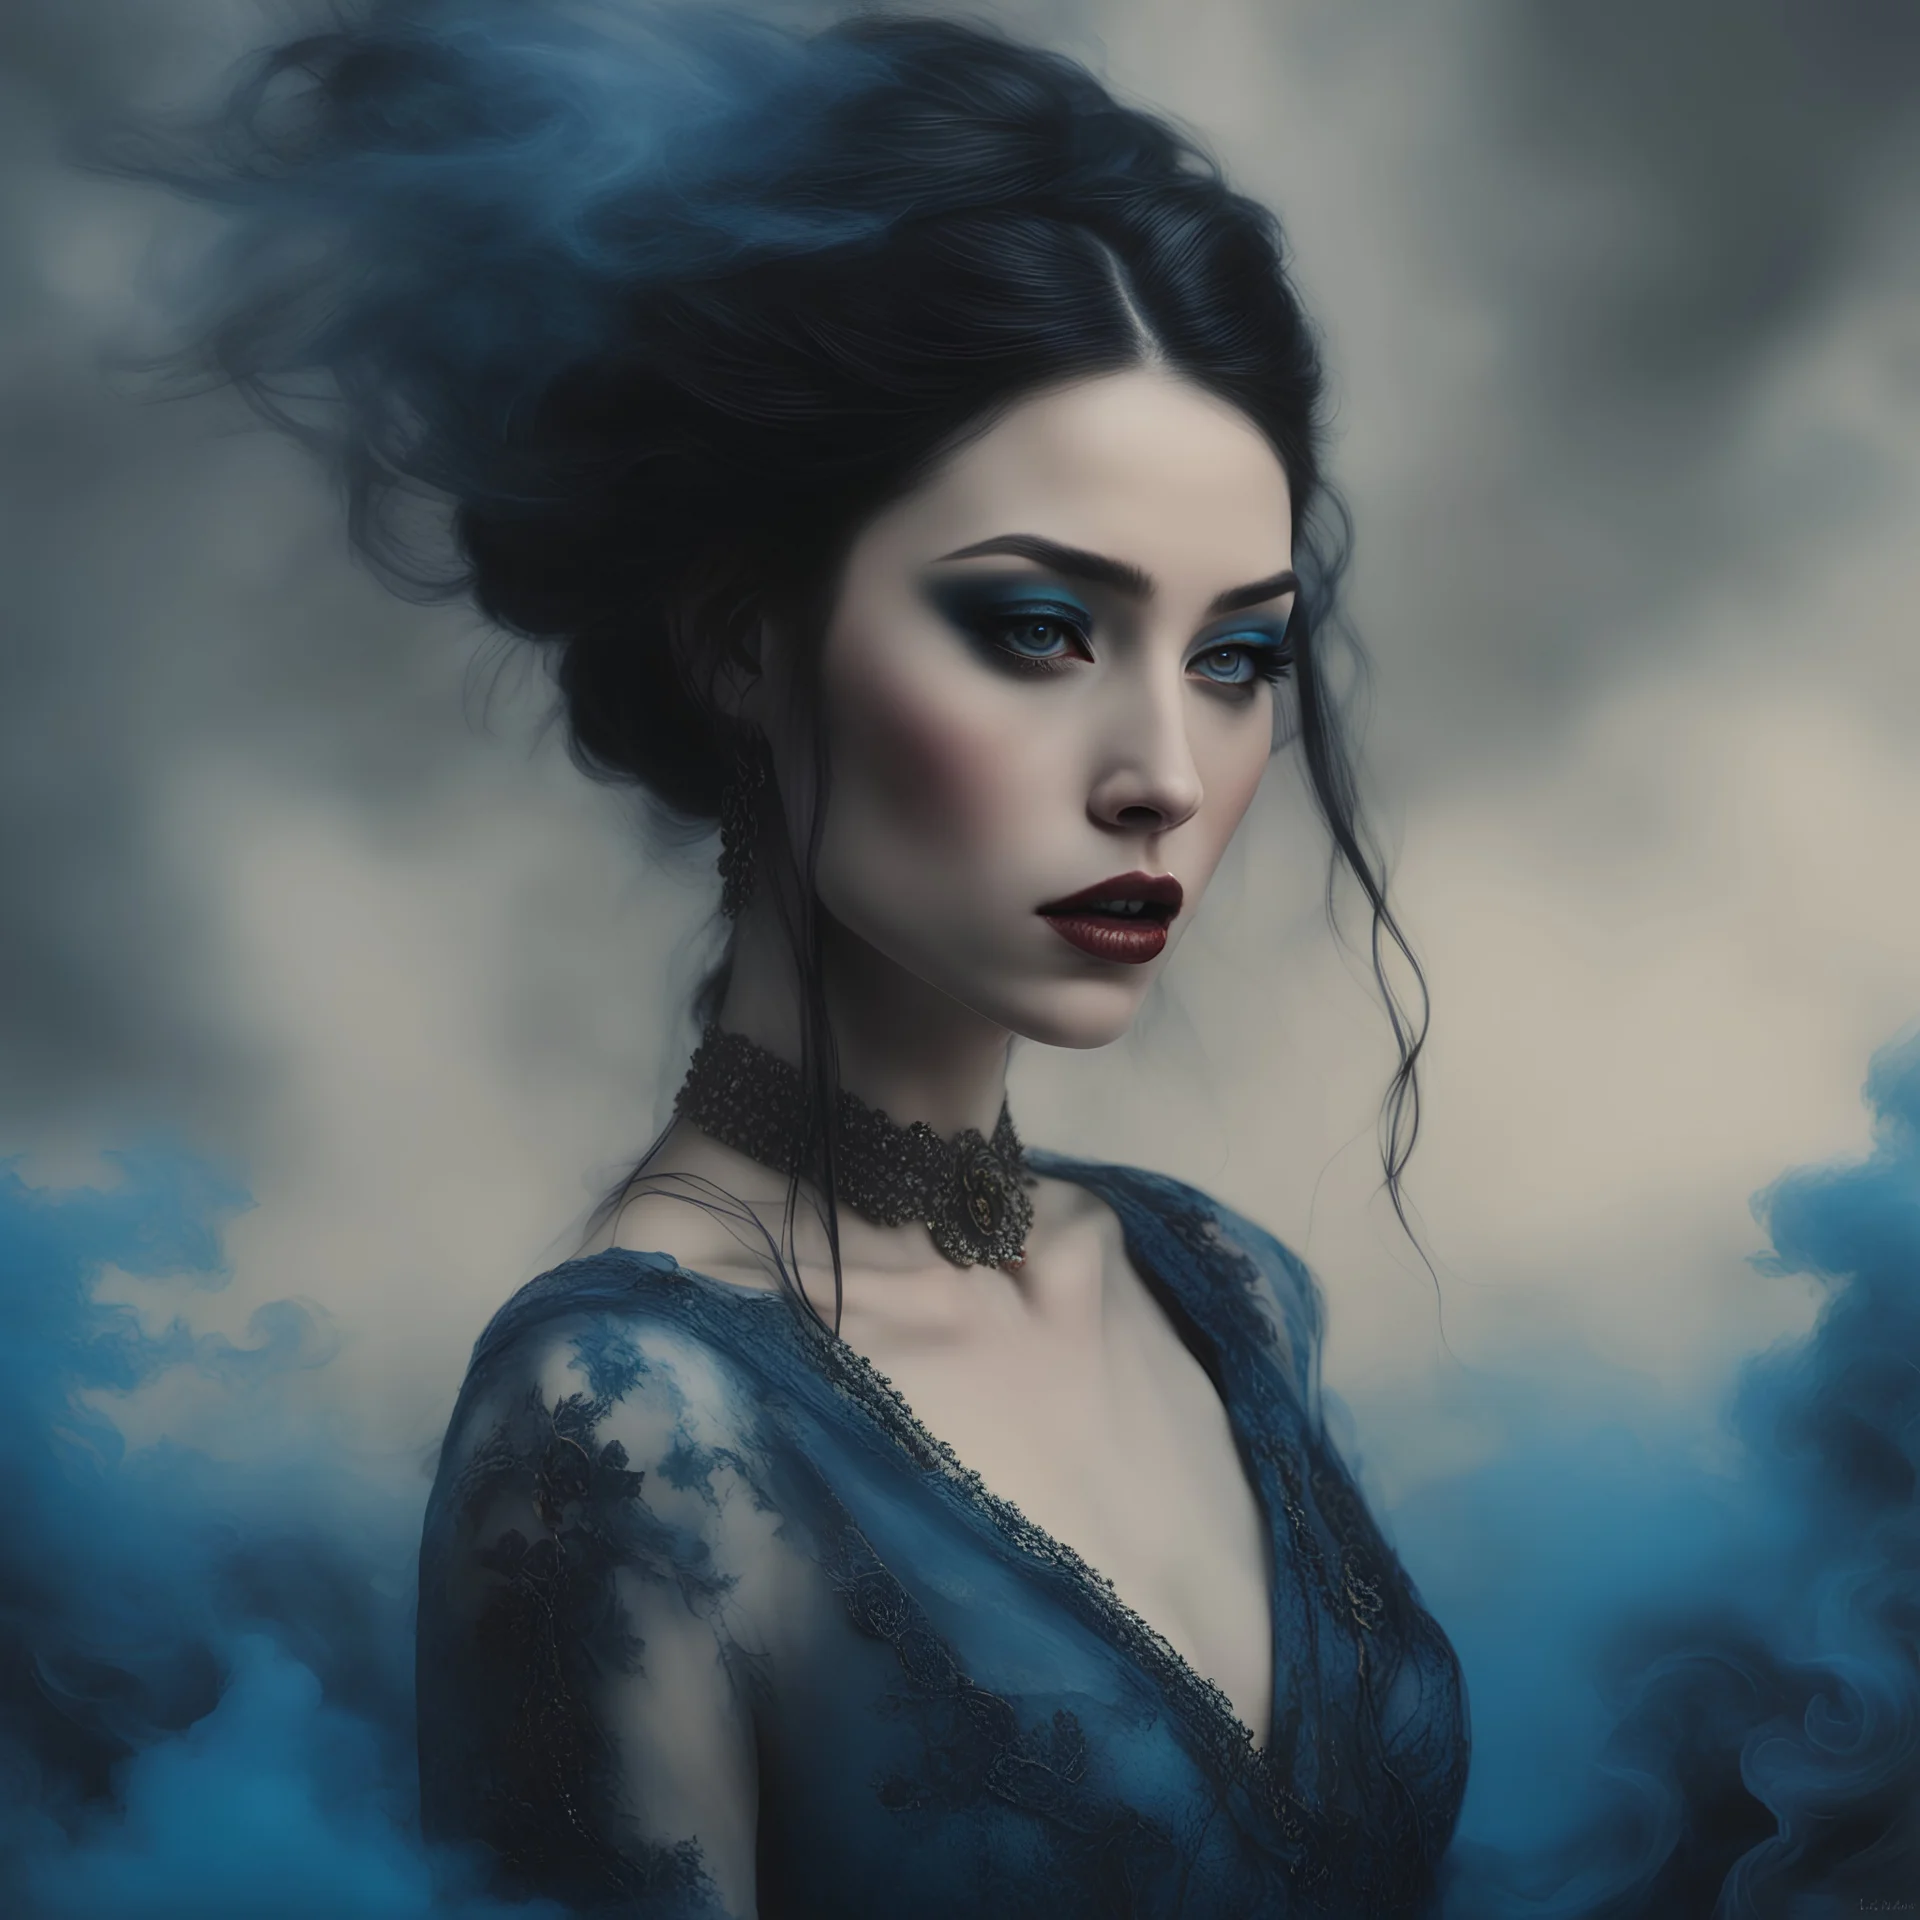 full body portrait Woman, in close-up with black hair, pale skin, Dramatic light, blue dress, hyper realistic, complex background, High quality, dark art, By Kyle Thompson, Bella Kotak, Luis Royo, Brooke Shaden, Carne Griffiths. black blue smoke made of smoke" city, , river, bridge"